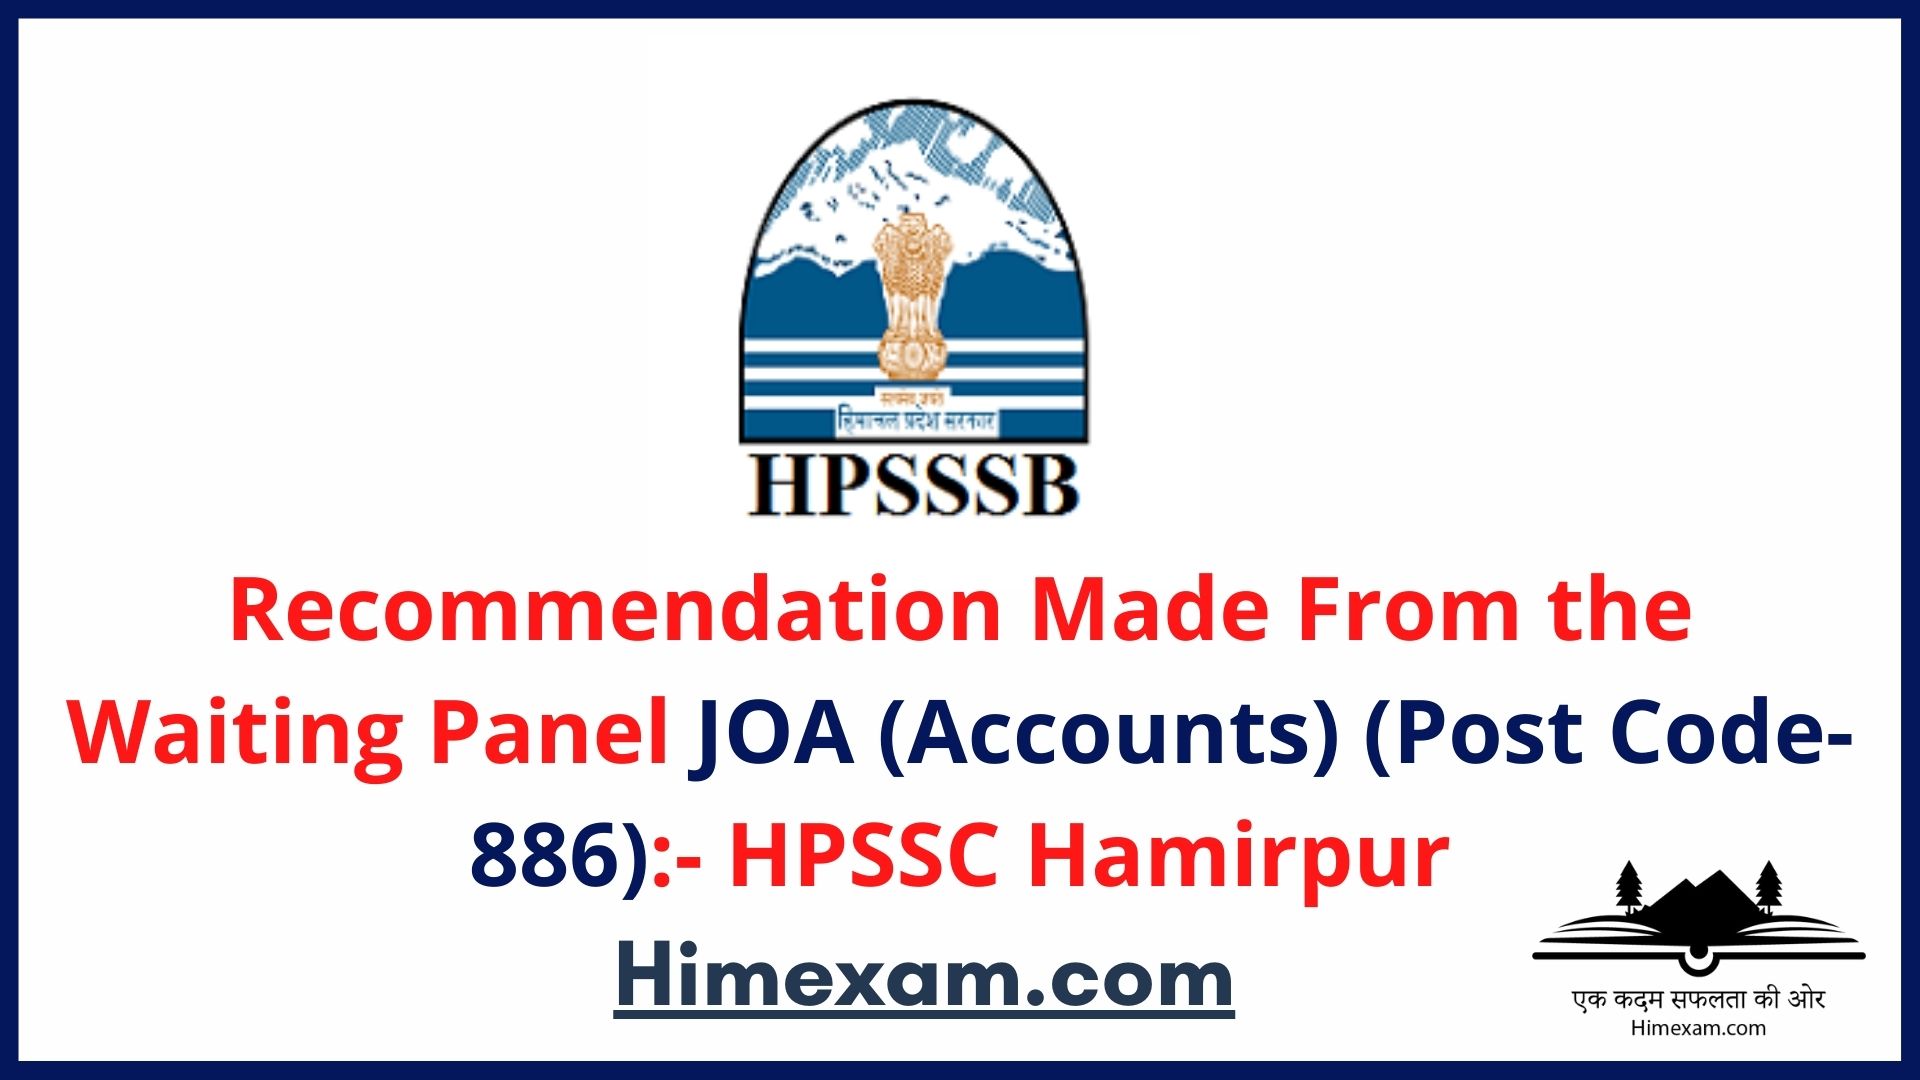 Recommendation Made From the Waiting Panel  JOA (Accounts) (Post Code-886):- HPSSC Hamirpur